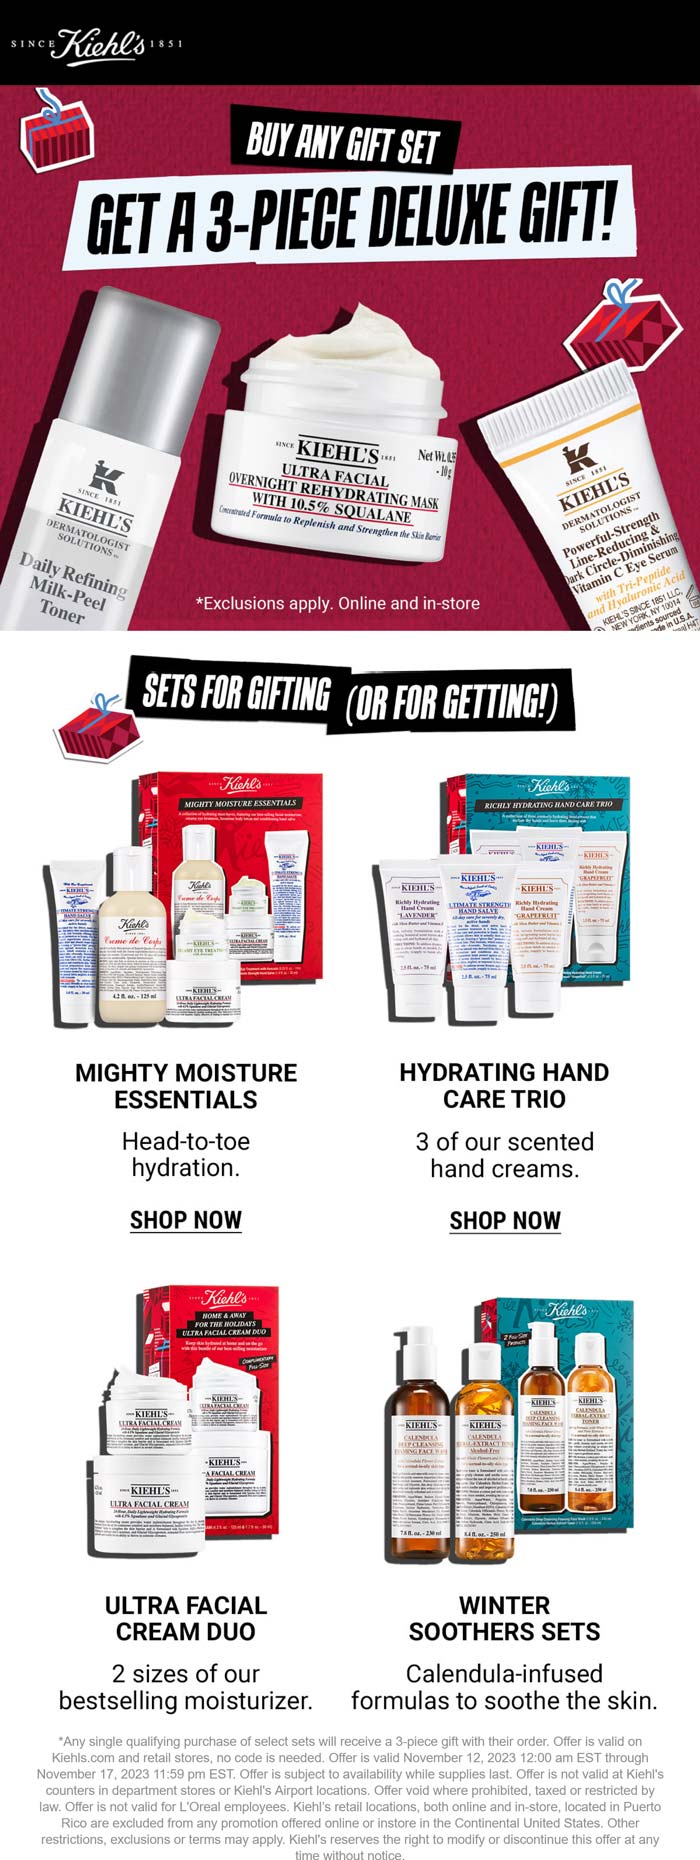 Kiehls stores Coupon  Free 3pc kit with any gift set purchase online at Kiehls #kiehls 